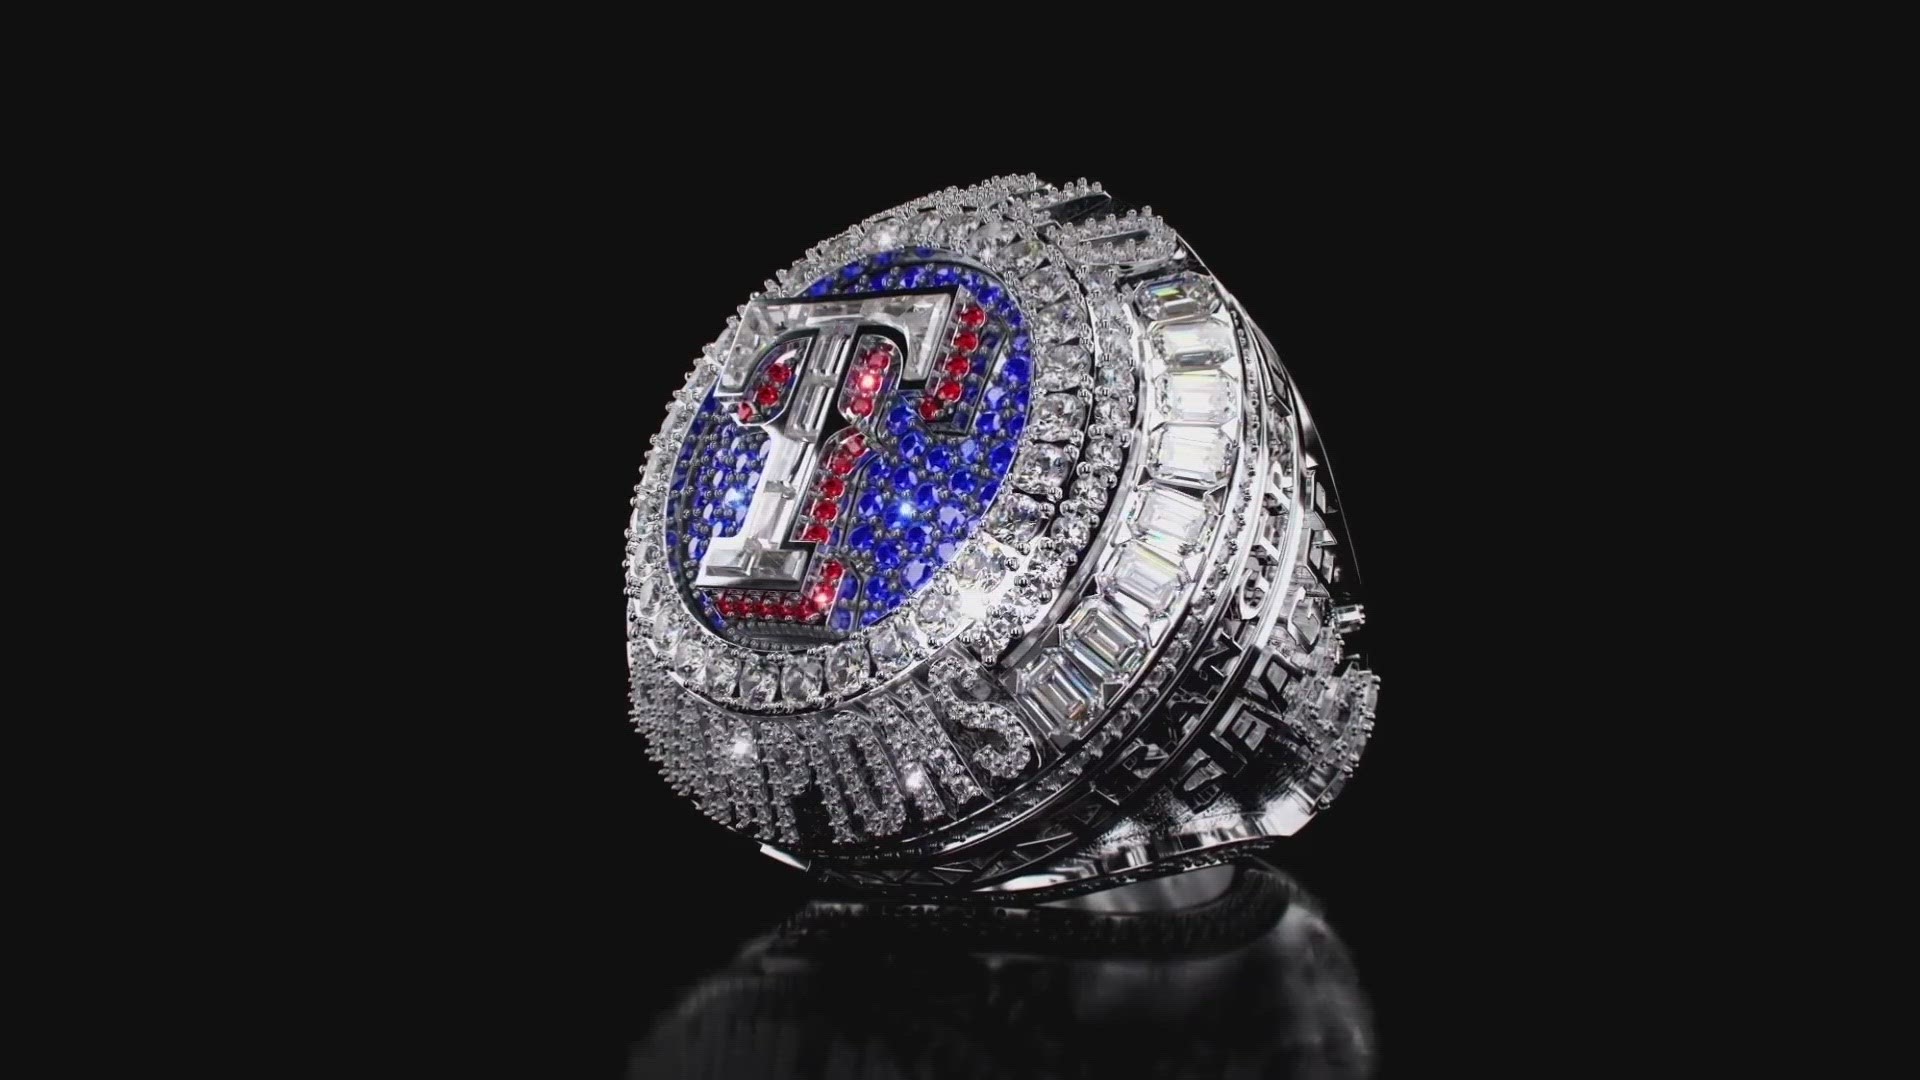 The Texas Rangers have unveiled the team's first-ever World Series rings.